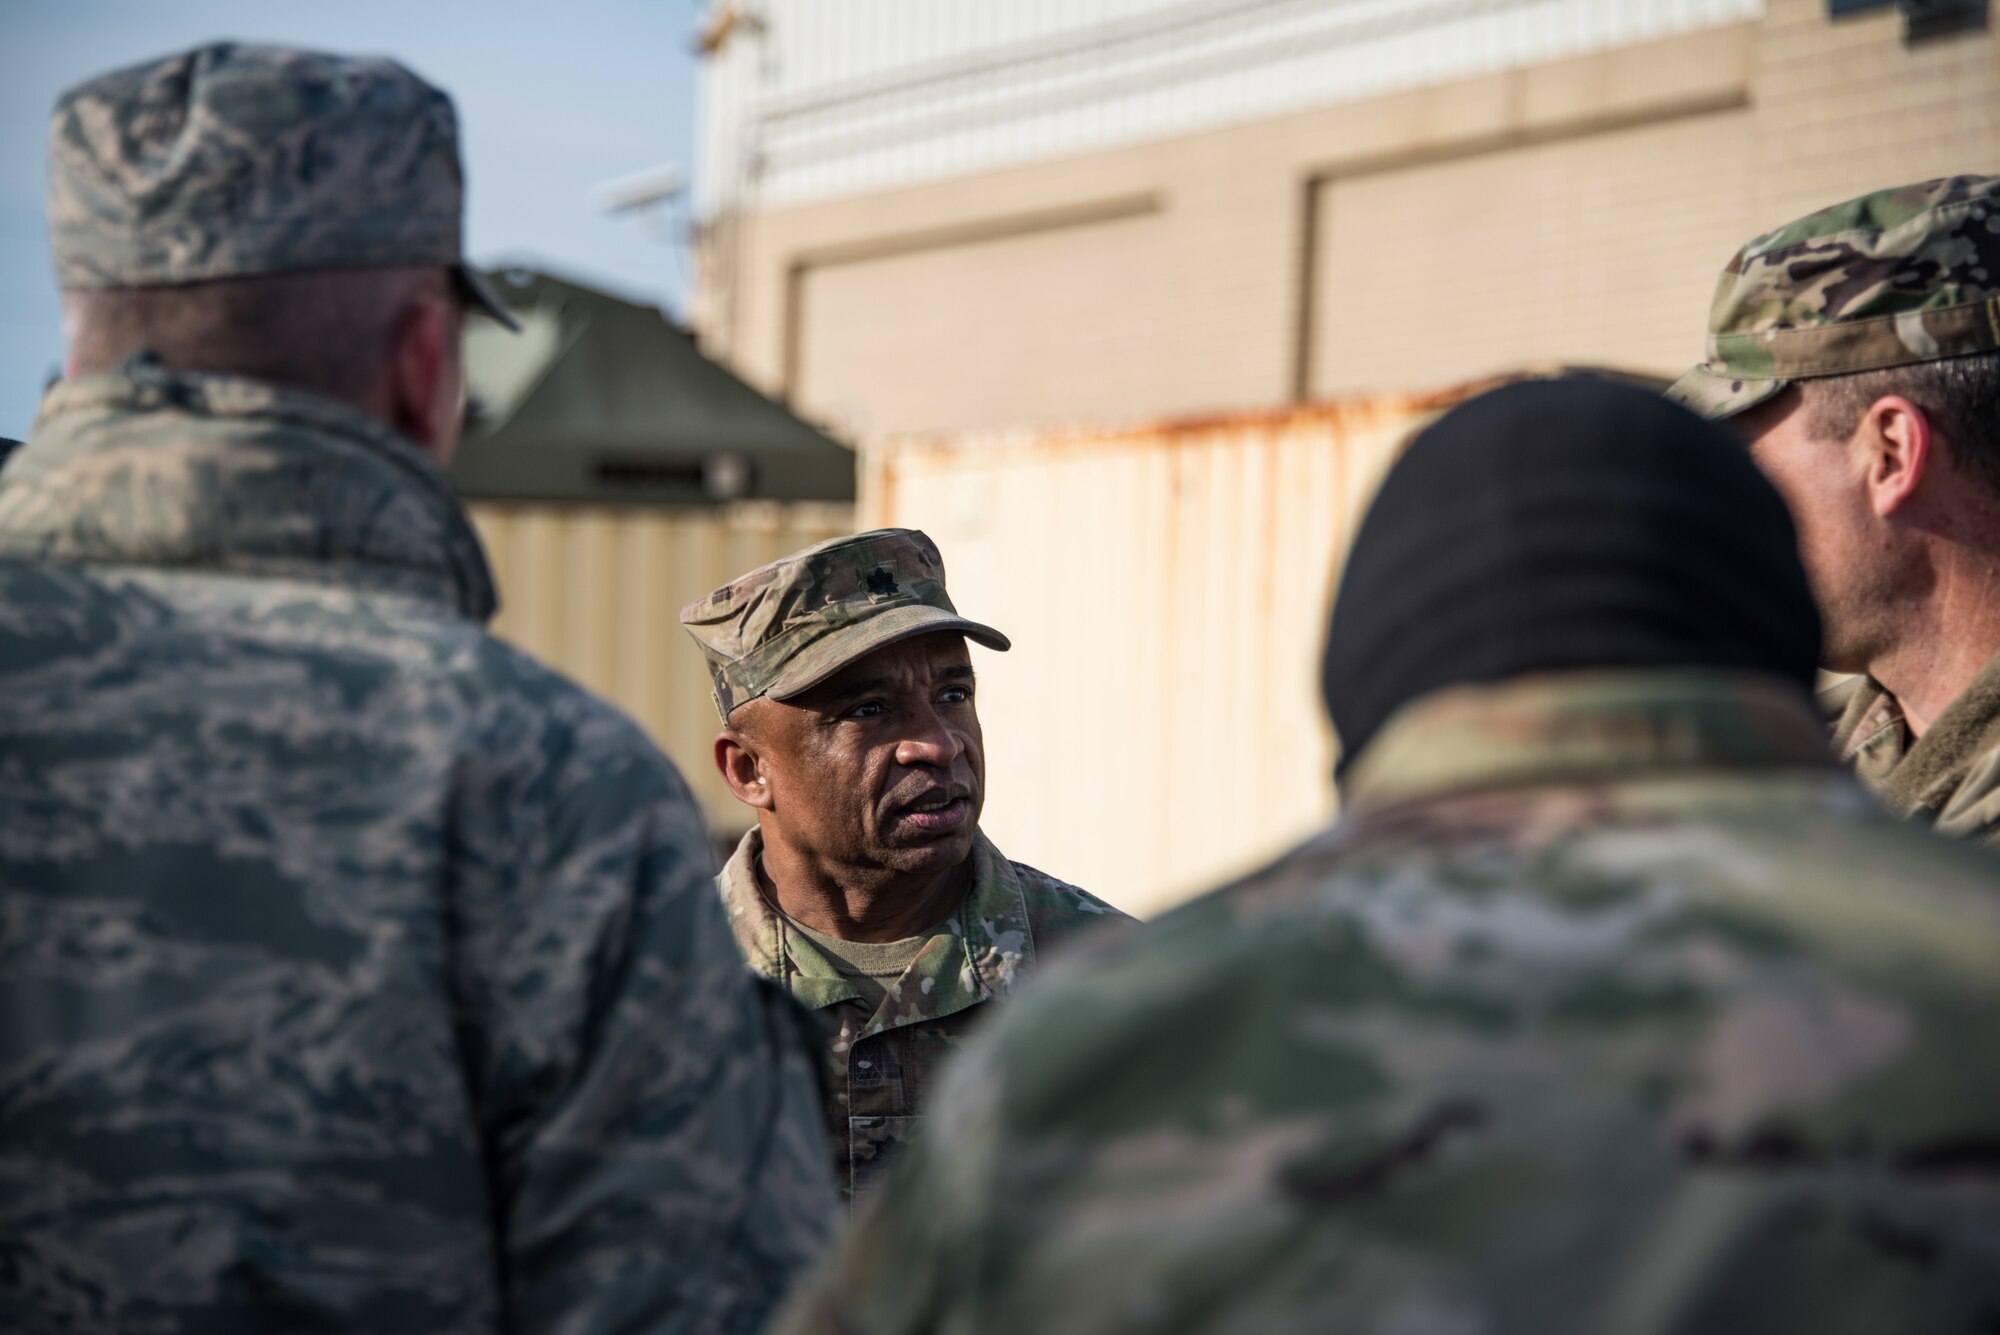 U.S. Army Lt. Col. Garland Pennington, Delaware Army National Guard Joint Operations Center director, briefs leaders on Total Force/Joint Training Exercise Diamond Wing at Dover Air Force Base, Del., Nov. 14, 2019. The National Guard is prepared with highly-trained professionals and state-of the-art equipment to respond and support incident commanders in any disaster scenario, and training like Diamond Wing allows the Delaware Guard to showcase the capabilities of Citizen Guardsmen. (U.S. Air National Guard Photo by Mr. Mitchell Topal)